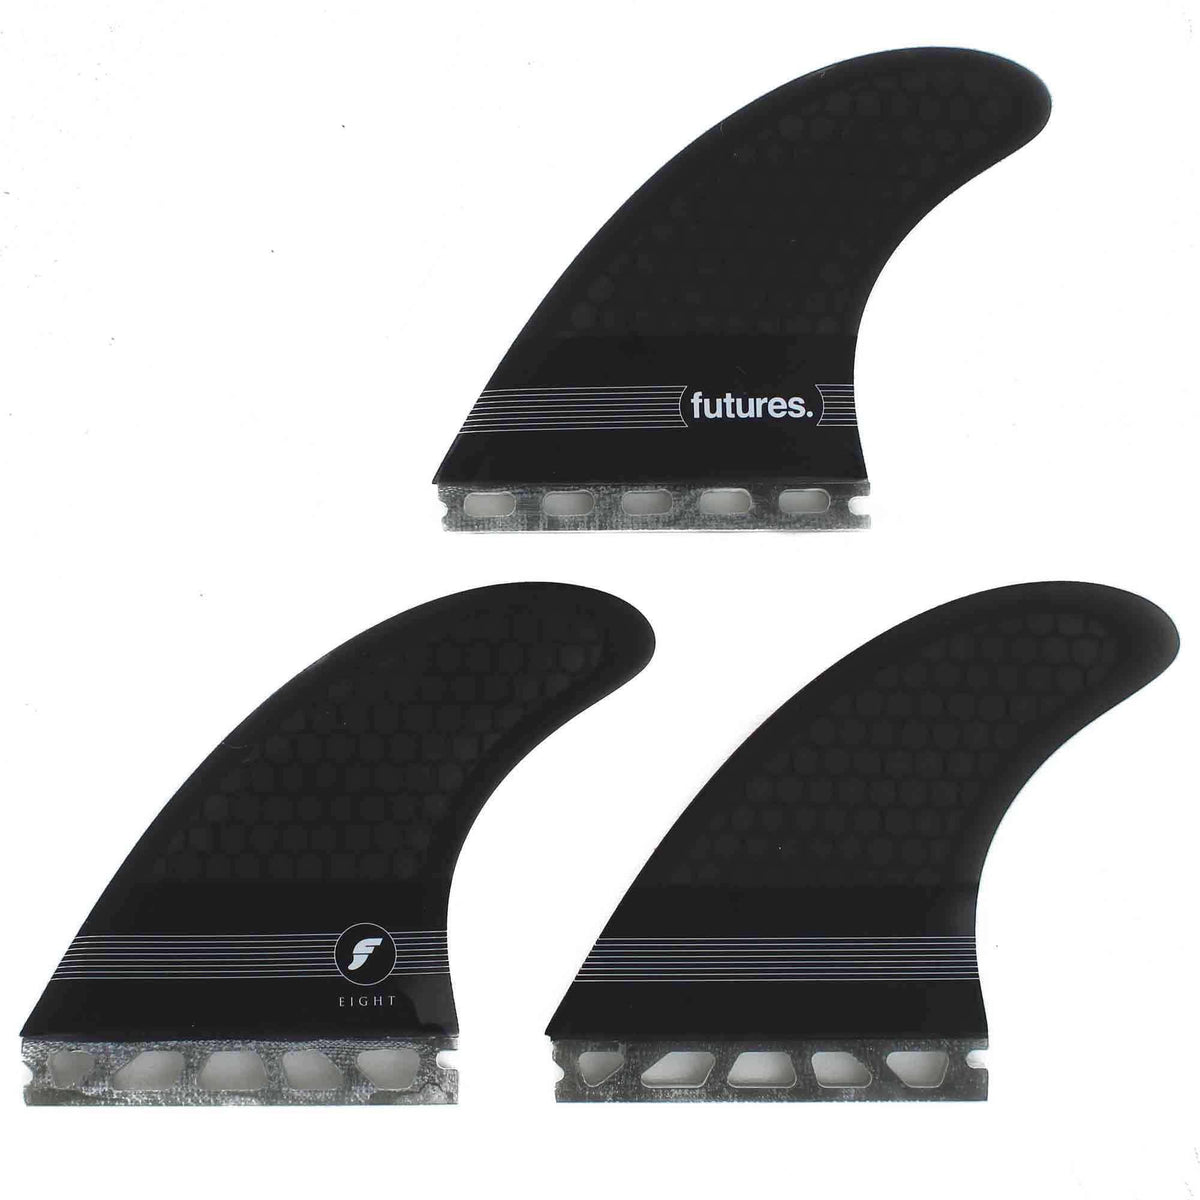 Futures F8 Honeycomb Large Thruster Surfboard Fins - Smoke Black White Futures Single Tab Fins by Futures Large Fins